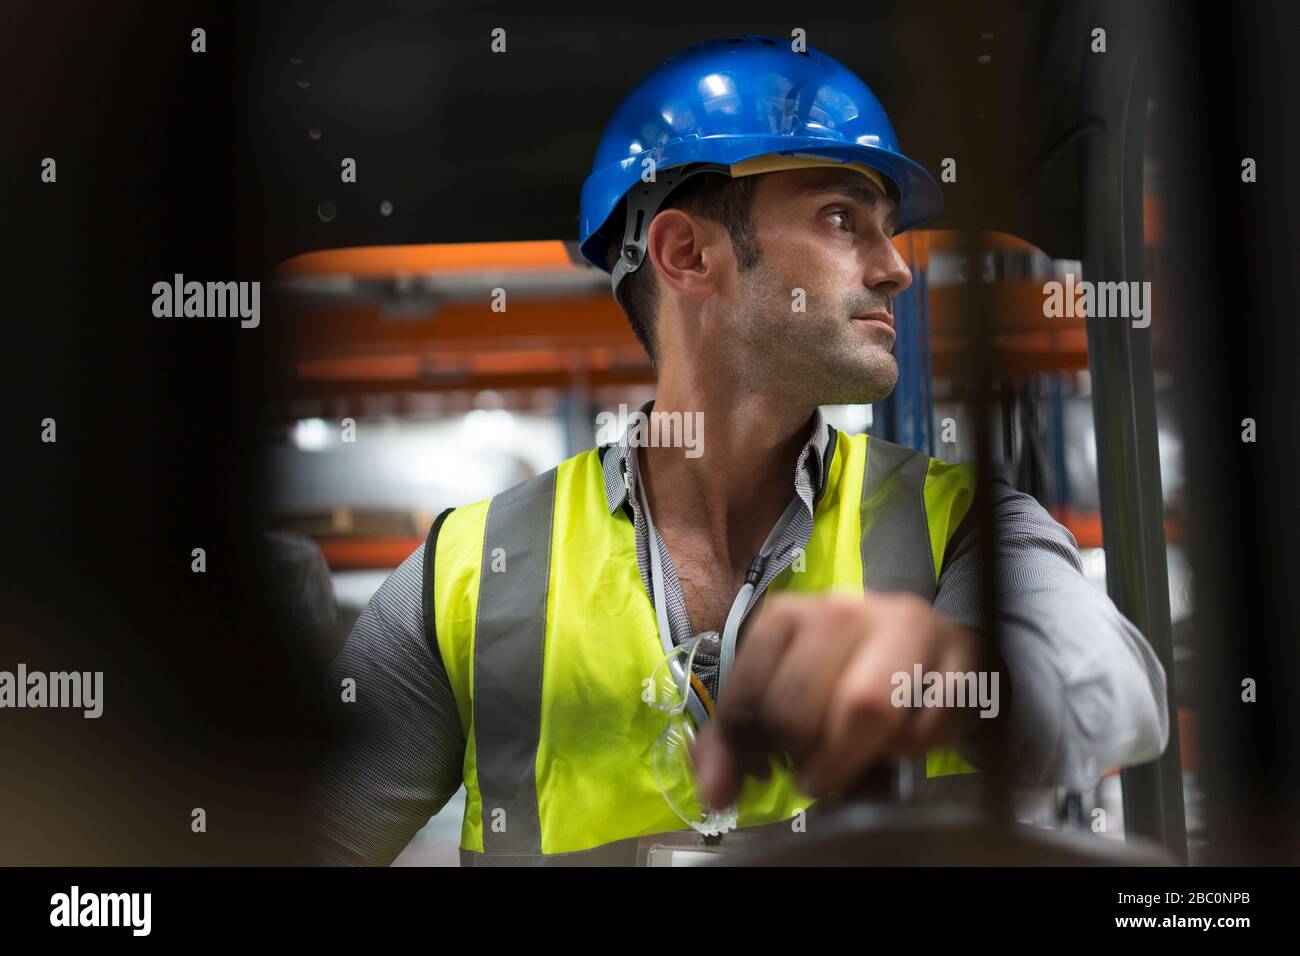 Male worker driving forklift, looking over shoulder in factory Stock Photo